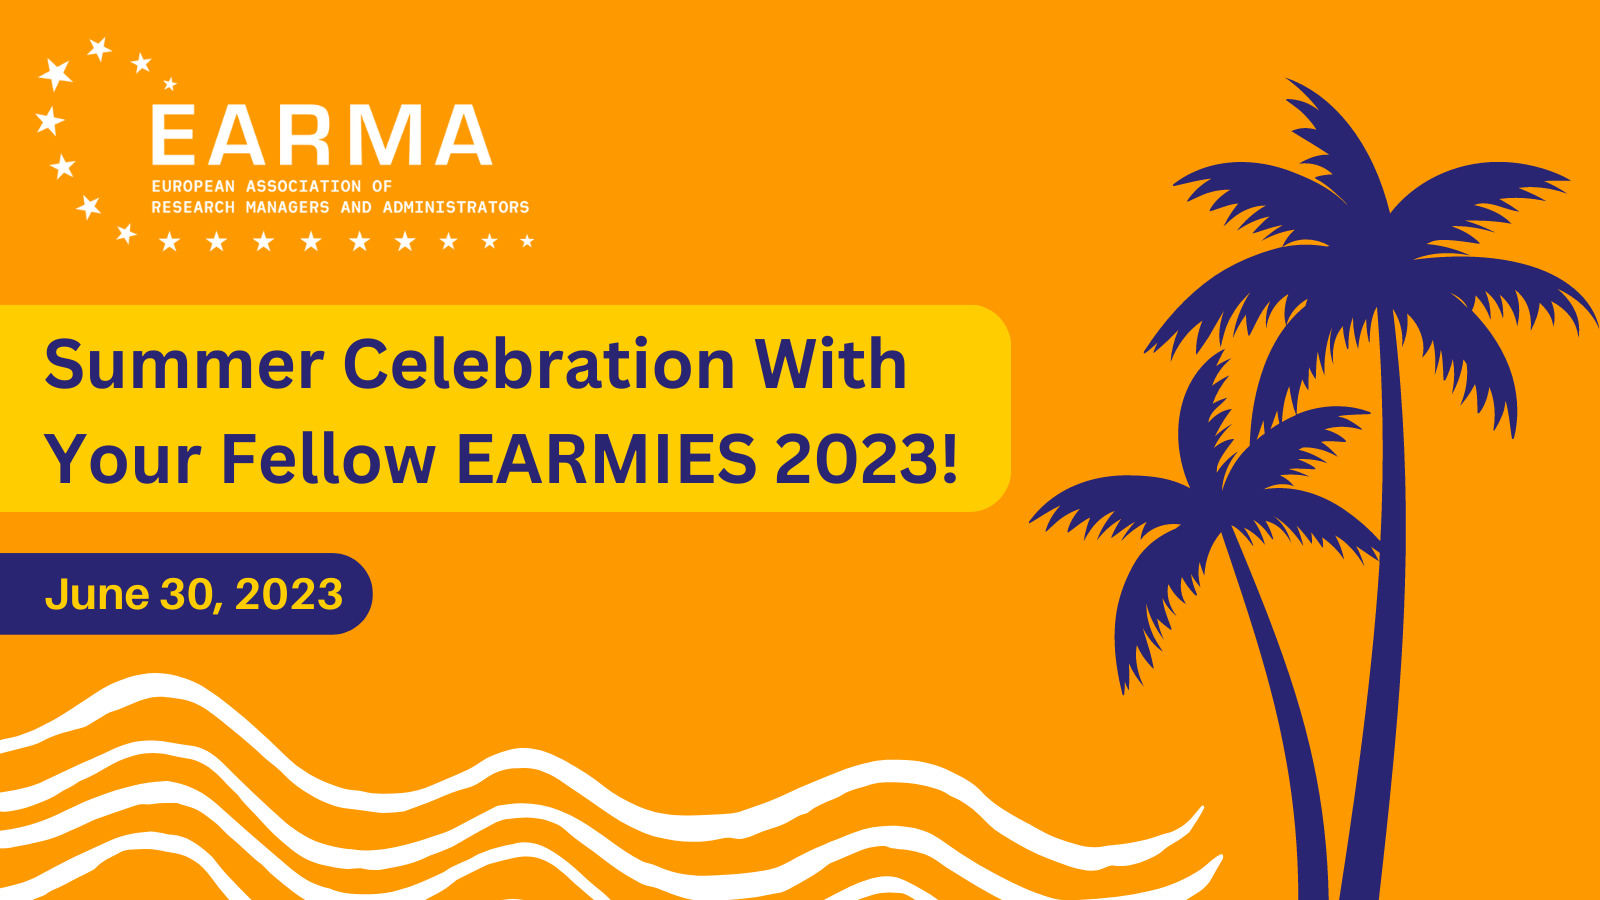 Summer Celebration With Your Fellow EARMIES 2023!